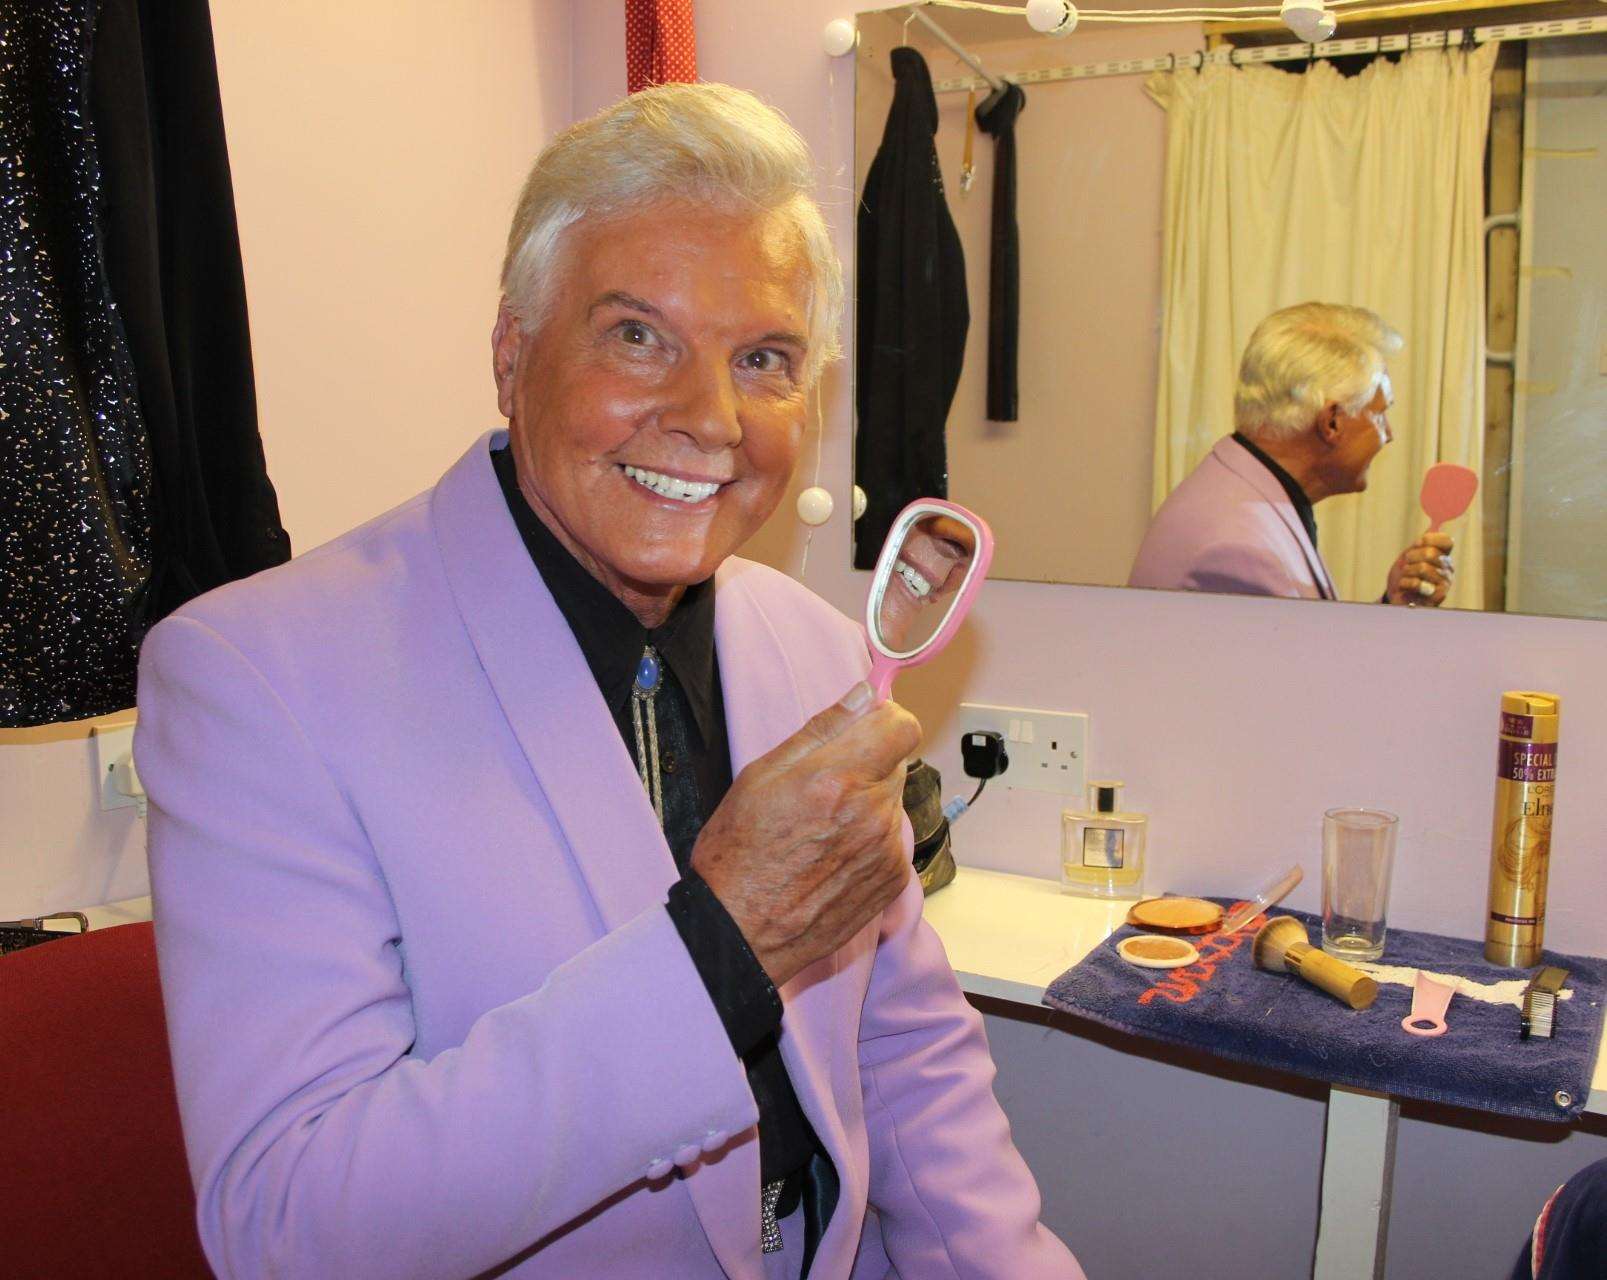 Jess Conrad checks his smile in a mirror backstage at the Criterion Theatre, Blue Town, on the Isle of Sheppey (3195085)